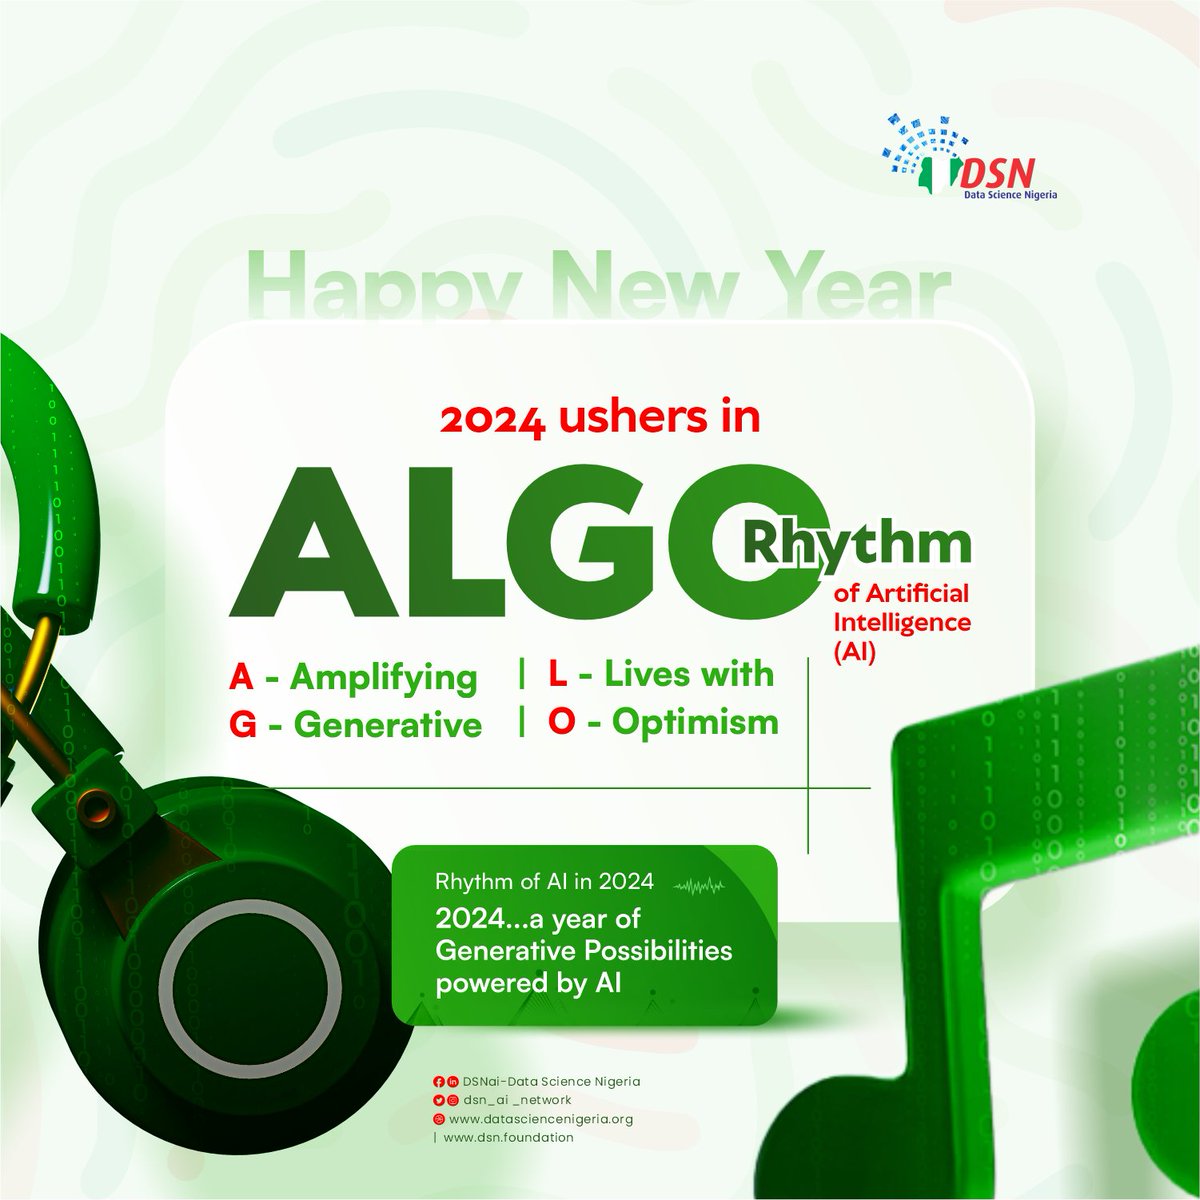 Happy new year! Our algorithms predict a symphony of Generative Possibilities powered by AI, making 2024 your year of unparalleled potential. Just as last year saw hyper-parameters finely tuned for your success, get ready to ride the wave into a future shaped by AI innovation.